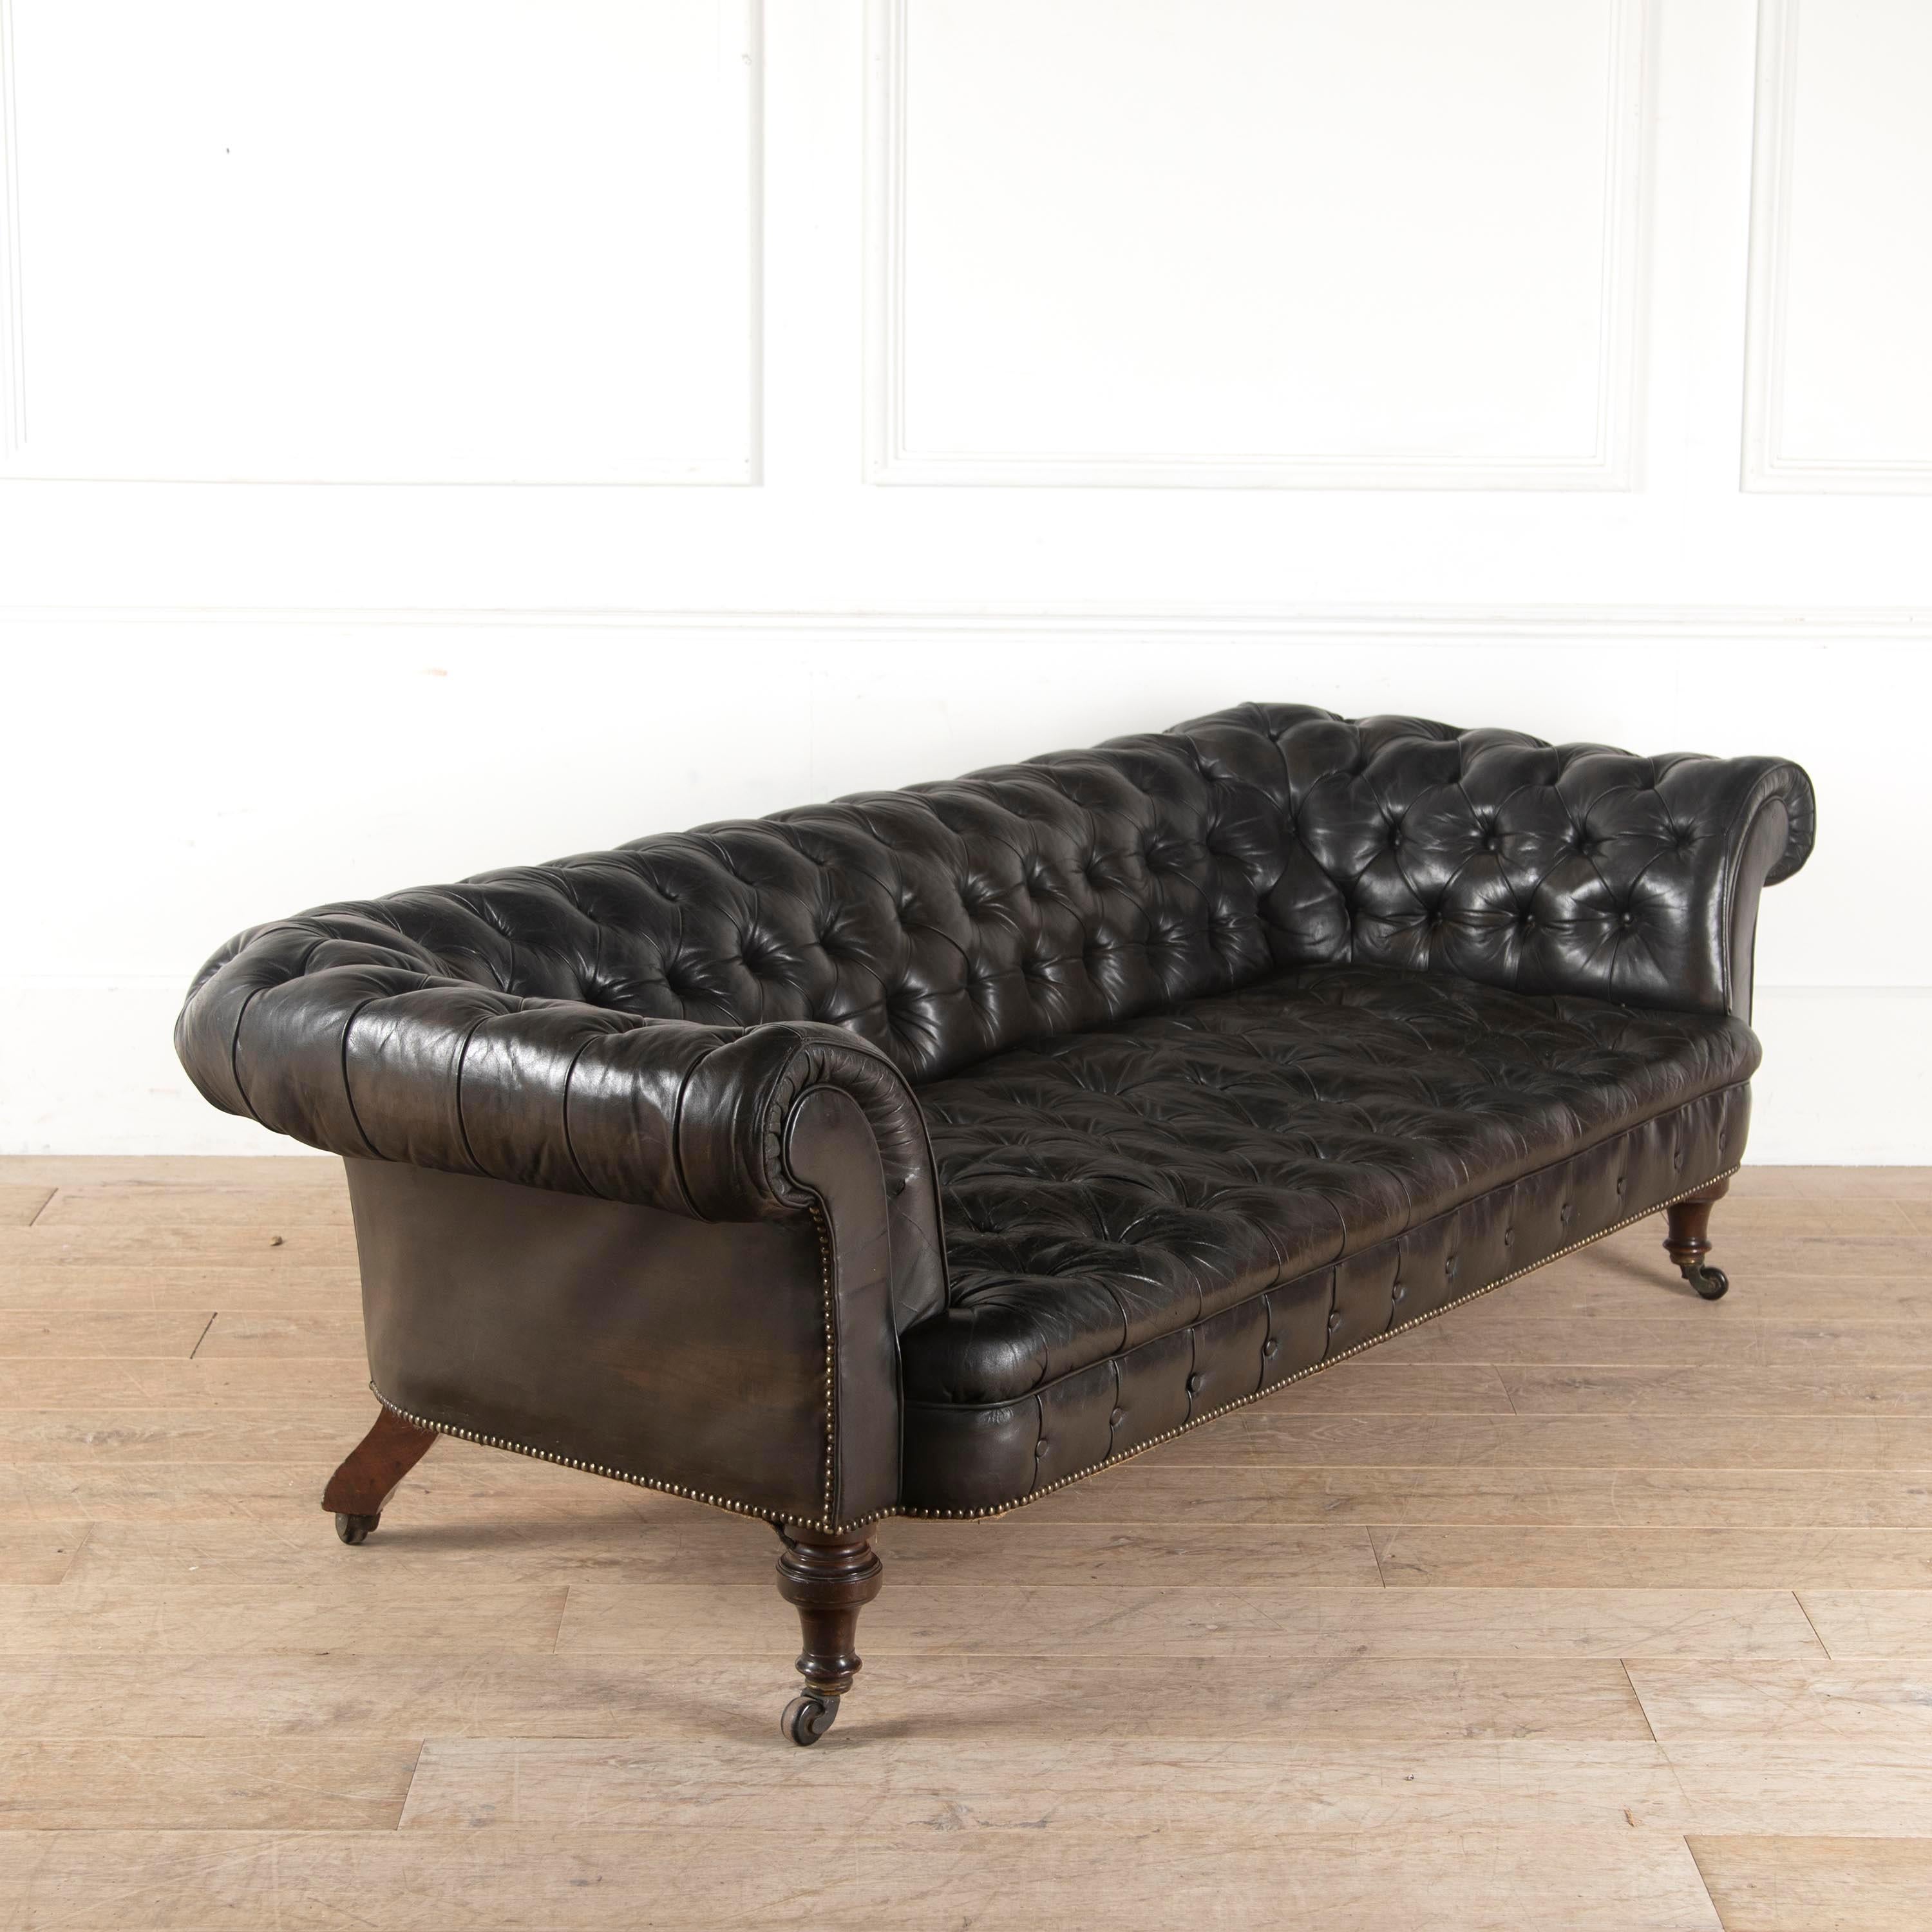 Beautifully proportioned mid-19th century English Chesterfield sofa.

It has been recently recovered in a wonderfully buttery black hide on boldly turned mahogany front legs.

Many of the innovations to this iconic model came circa 19th century,